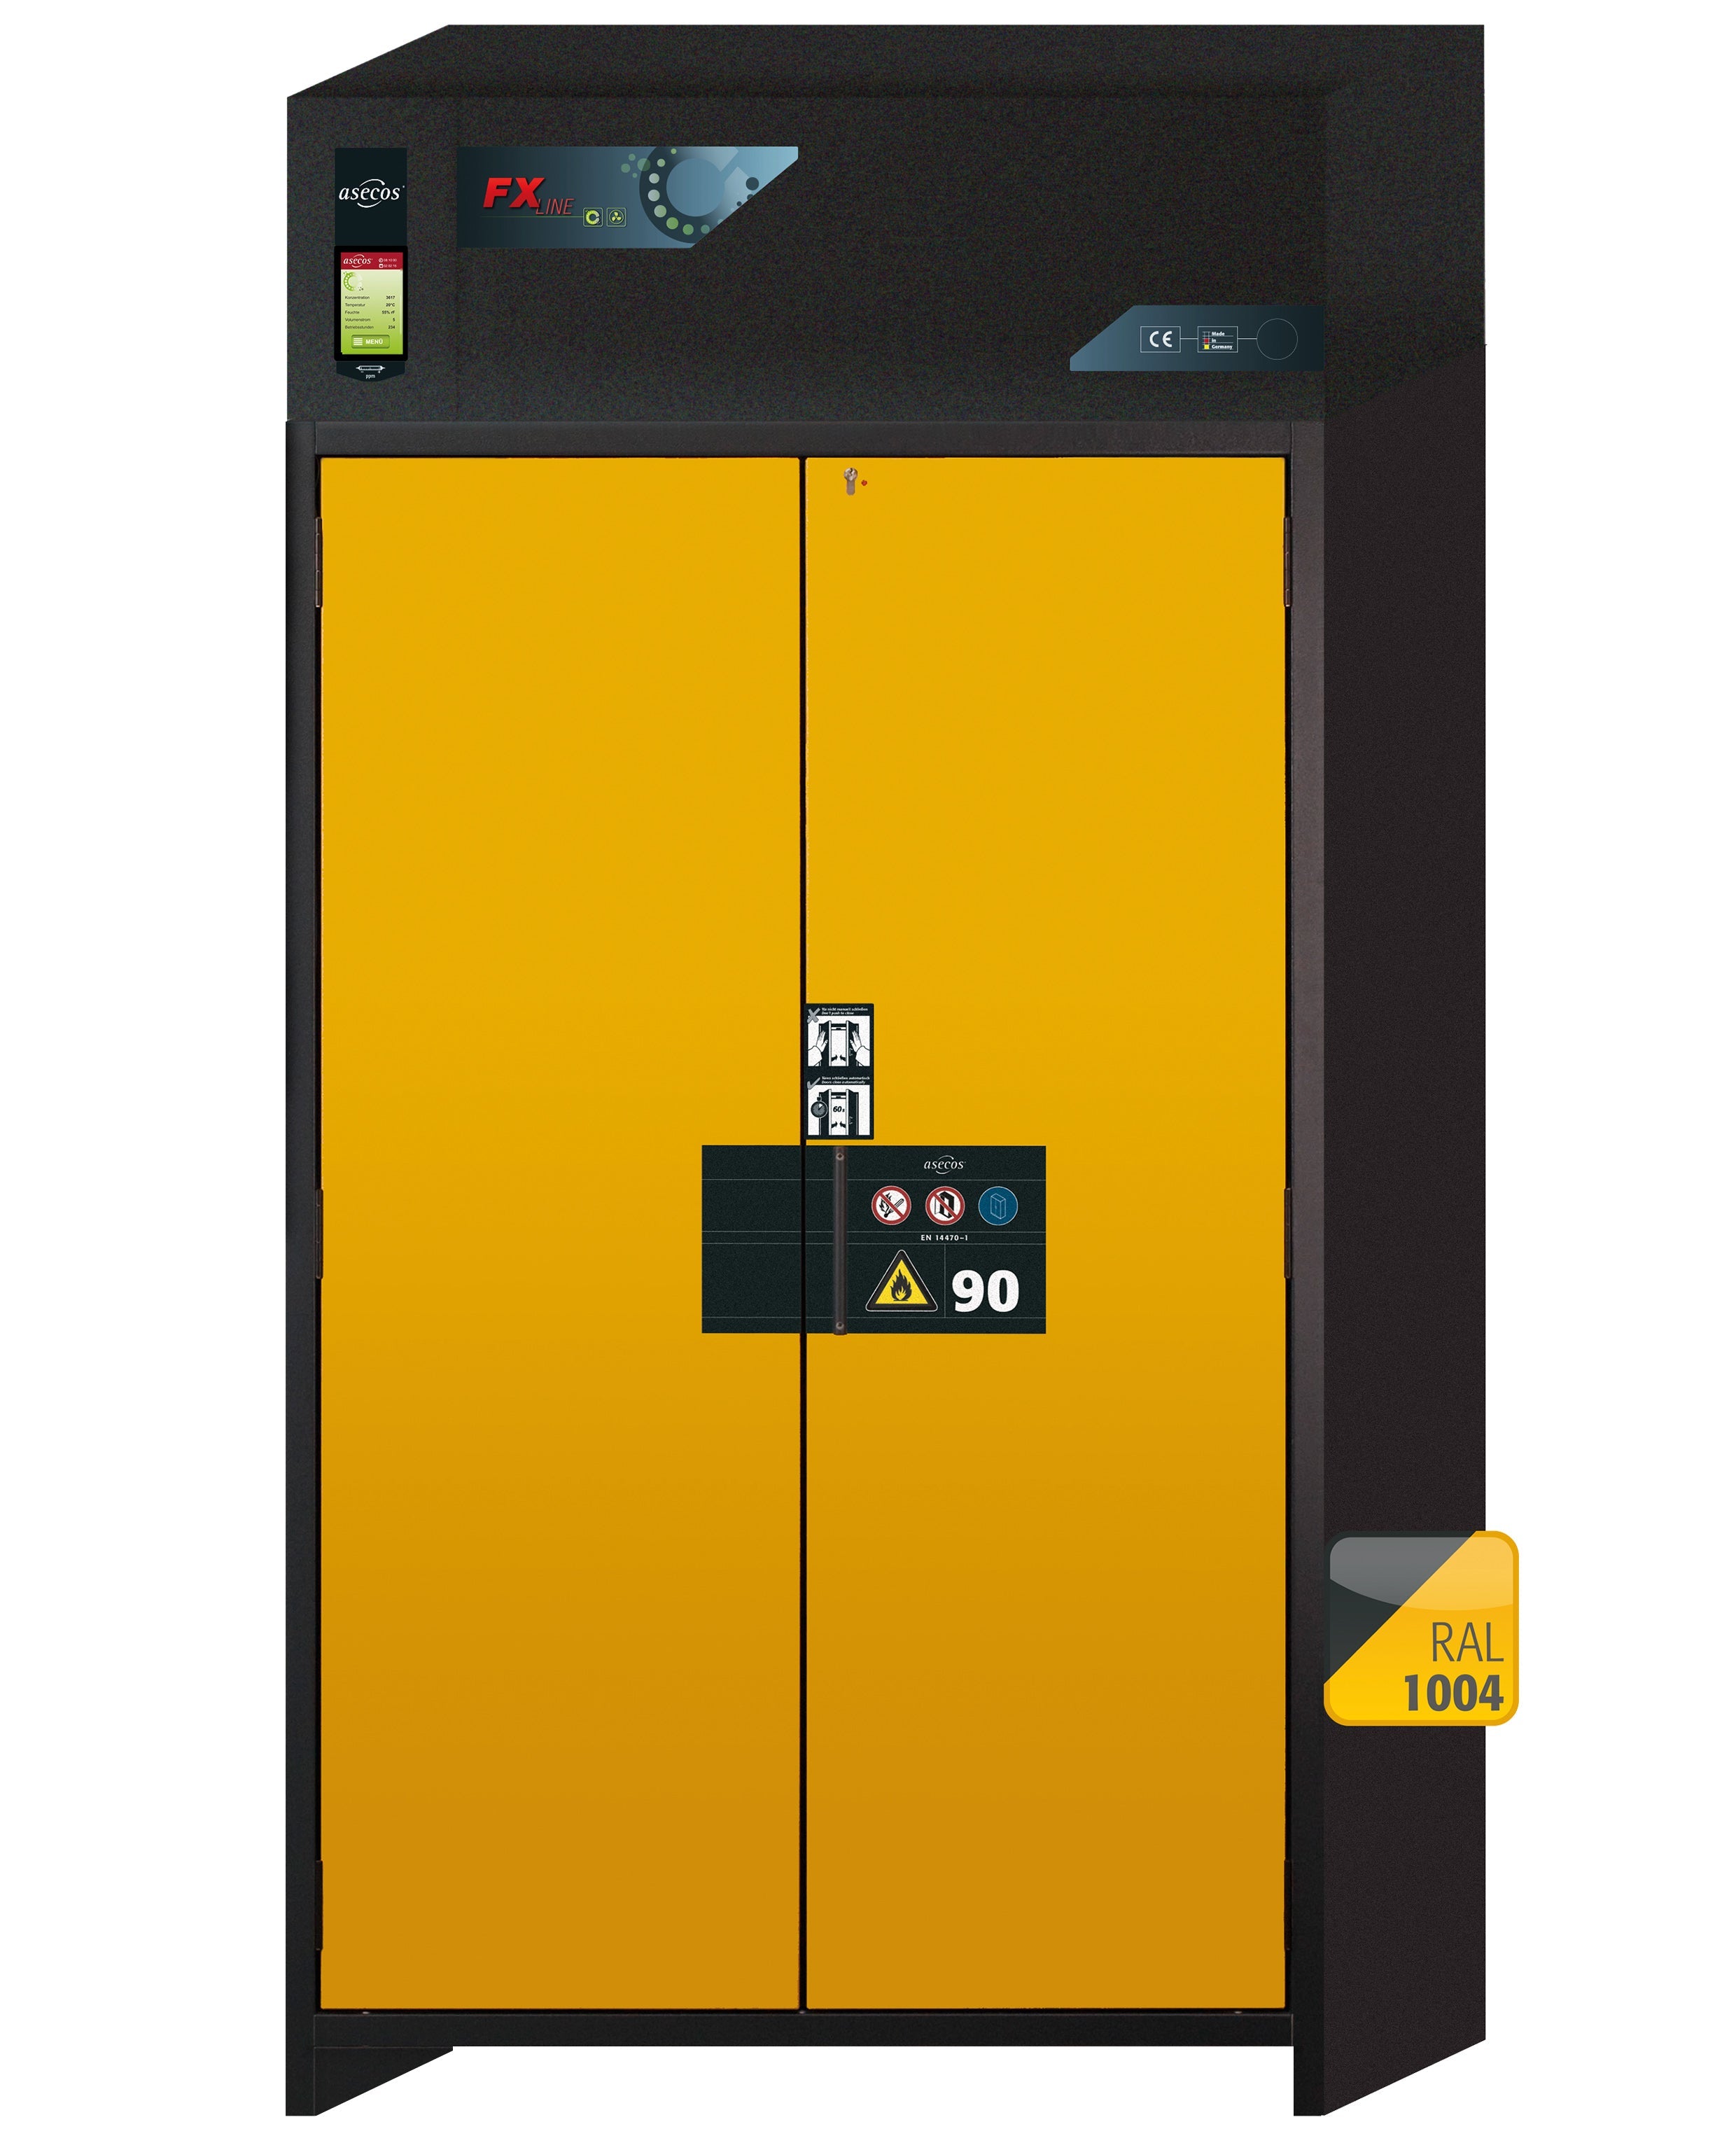 Type 90 recirculating air filter cabinet FX-PEGASUS-90 model FX90.229.120.WDAC in safety yellow RAL 1004 with 2x standard tray base (sheet steel)